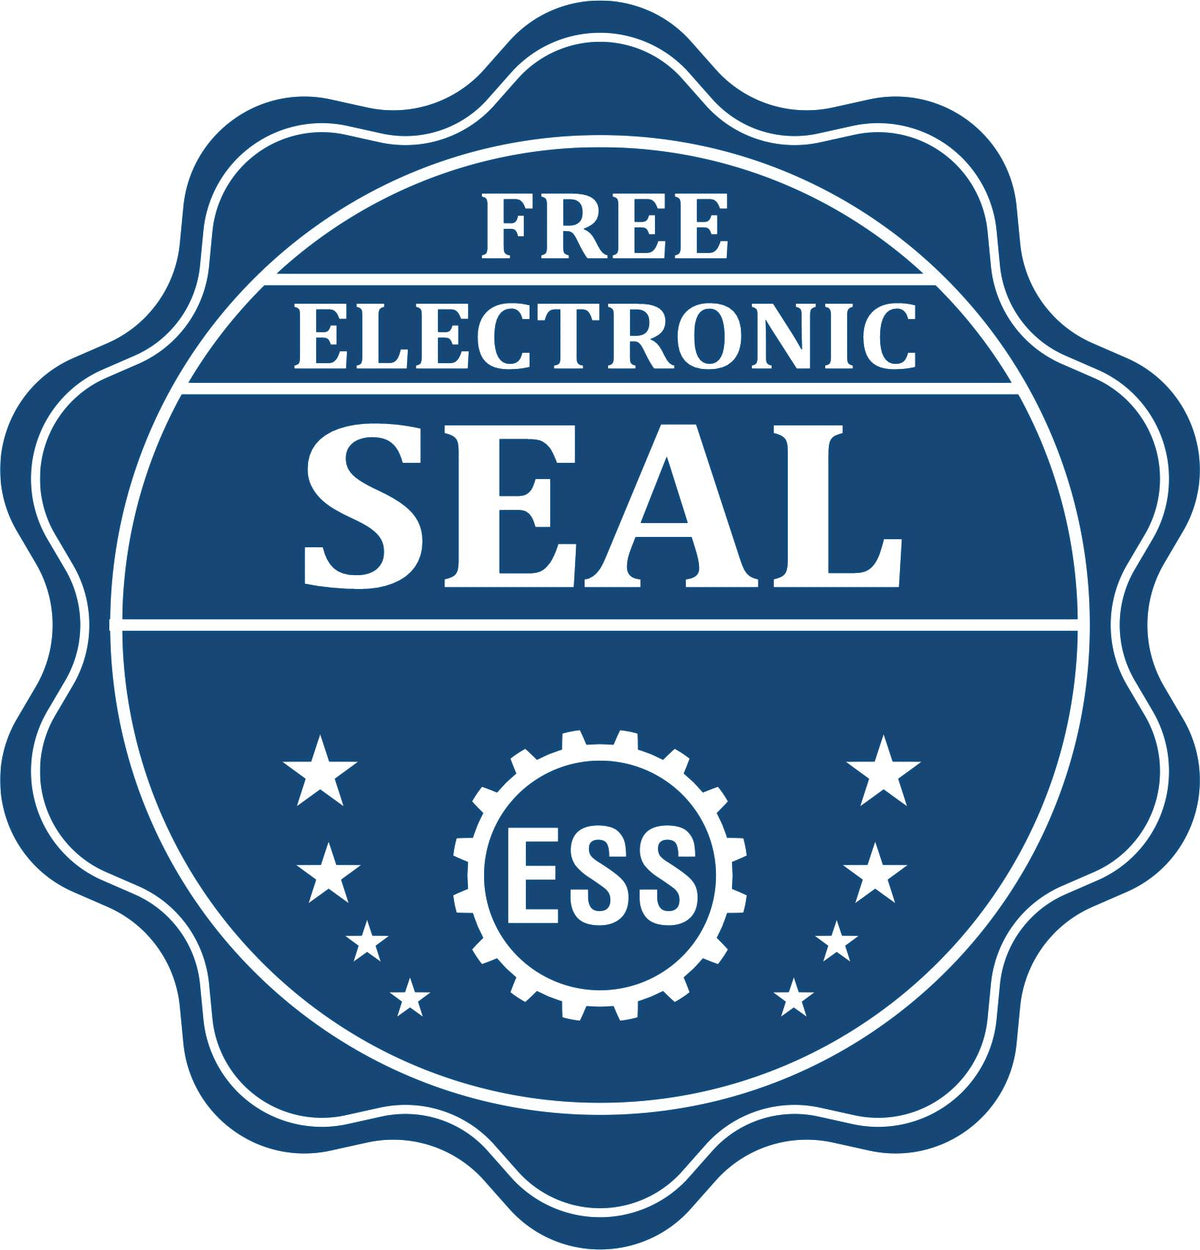 A badge showing a free electronic seal for the PSI Minnesota Notary Stamp with stars and the ESS gear on the emblem.